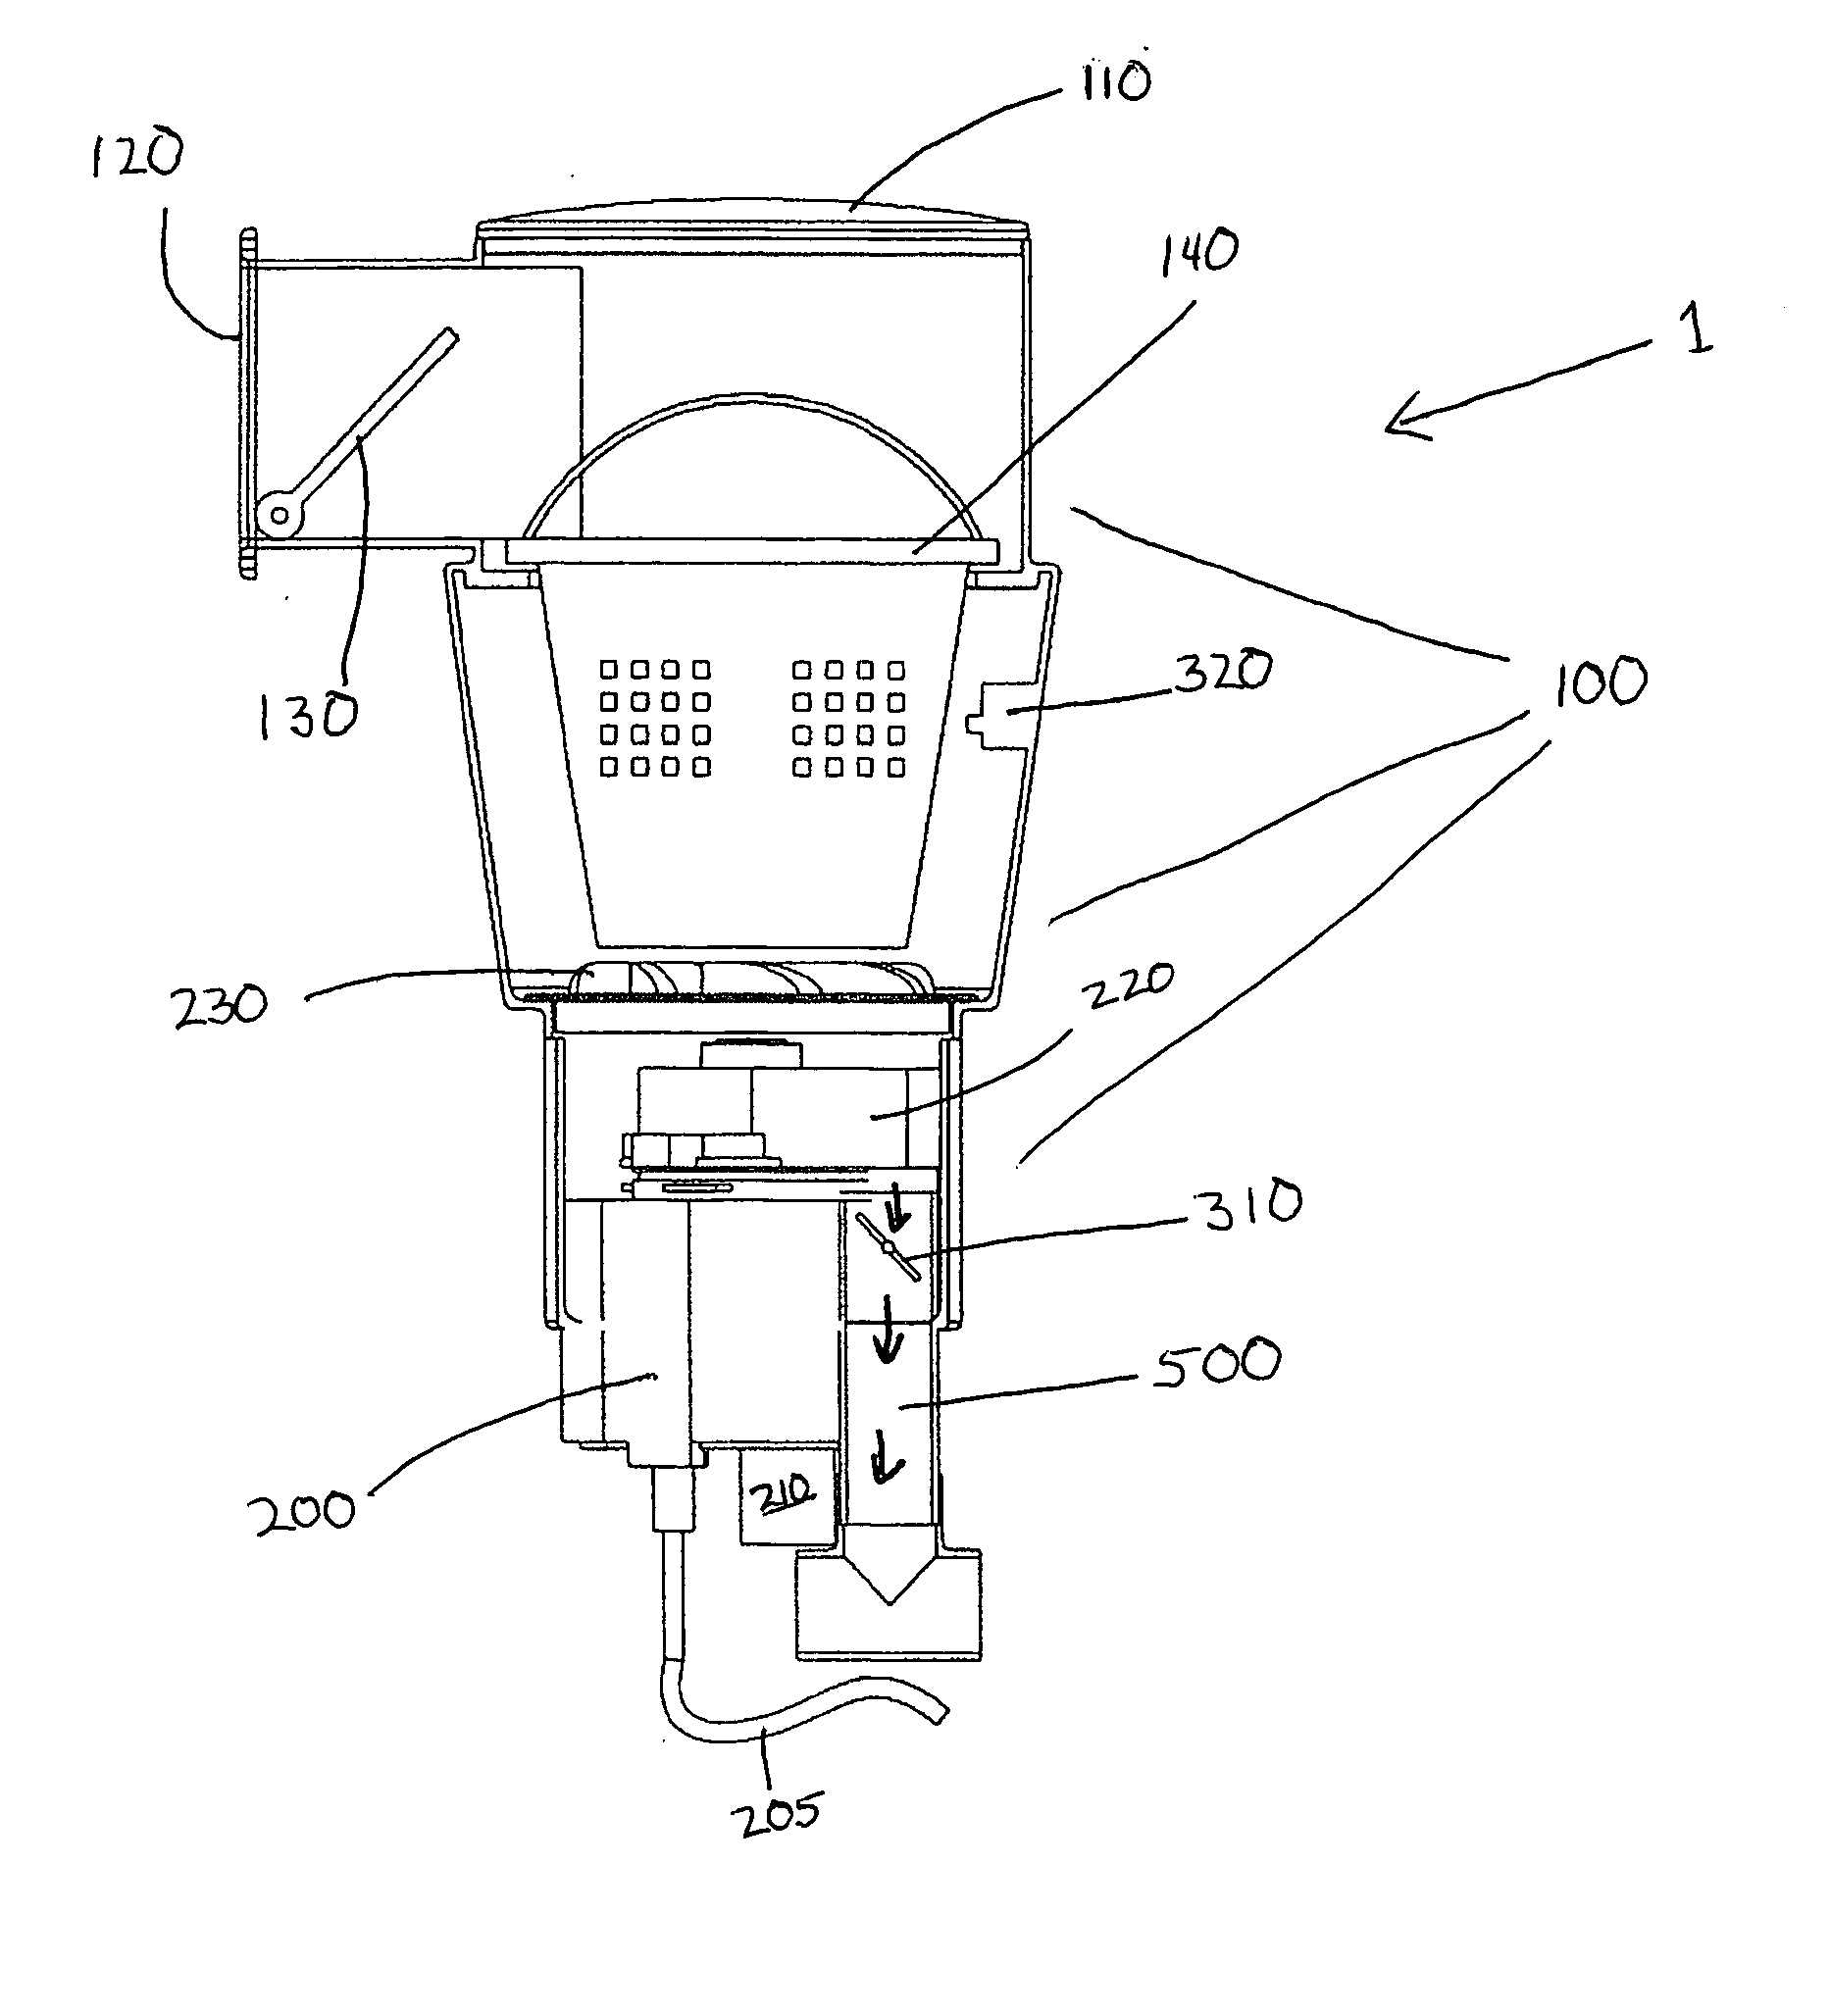 Swimming pool skimmer pump assembly